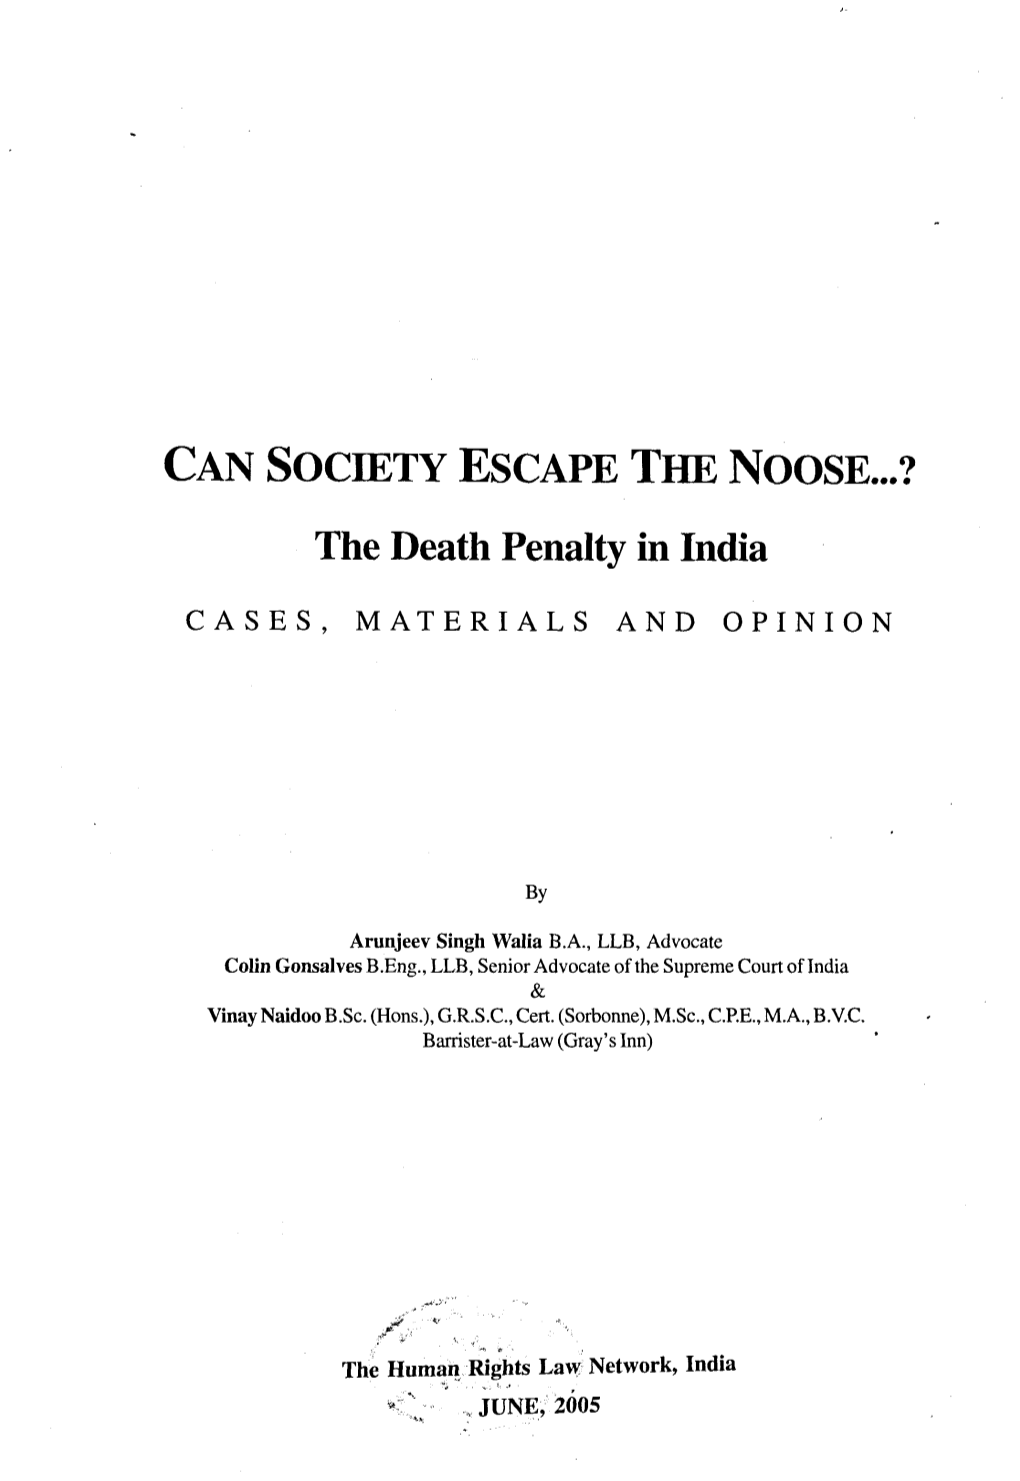 The Death Penalty in India